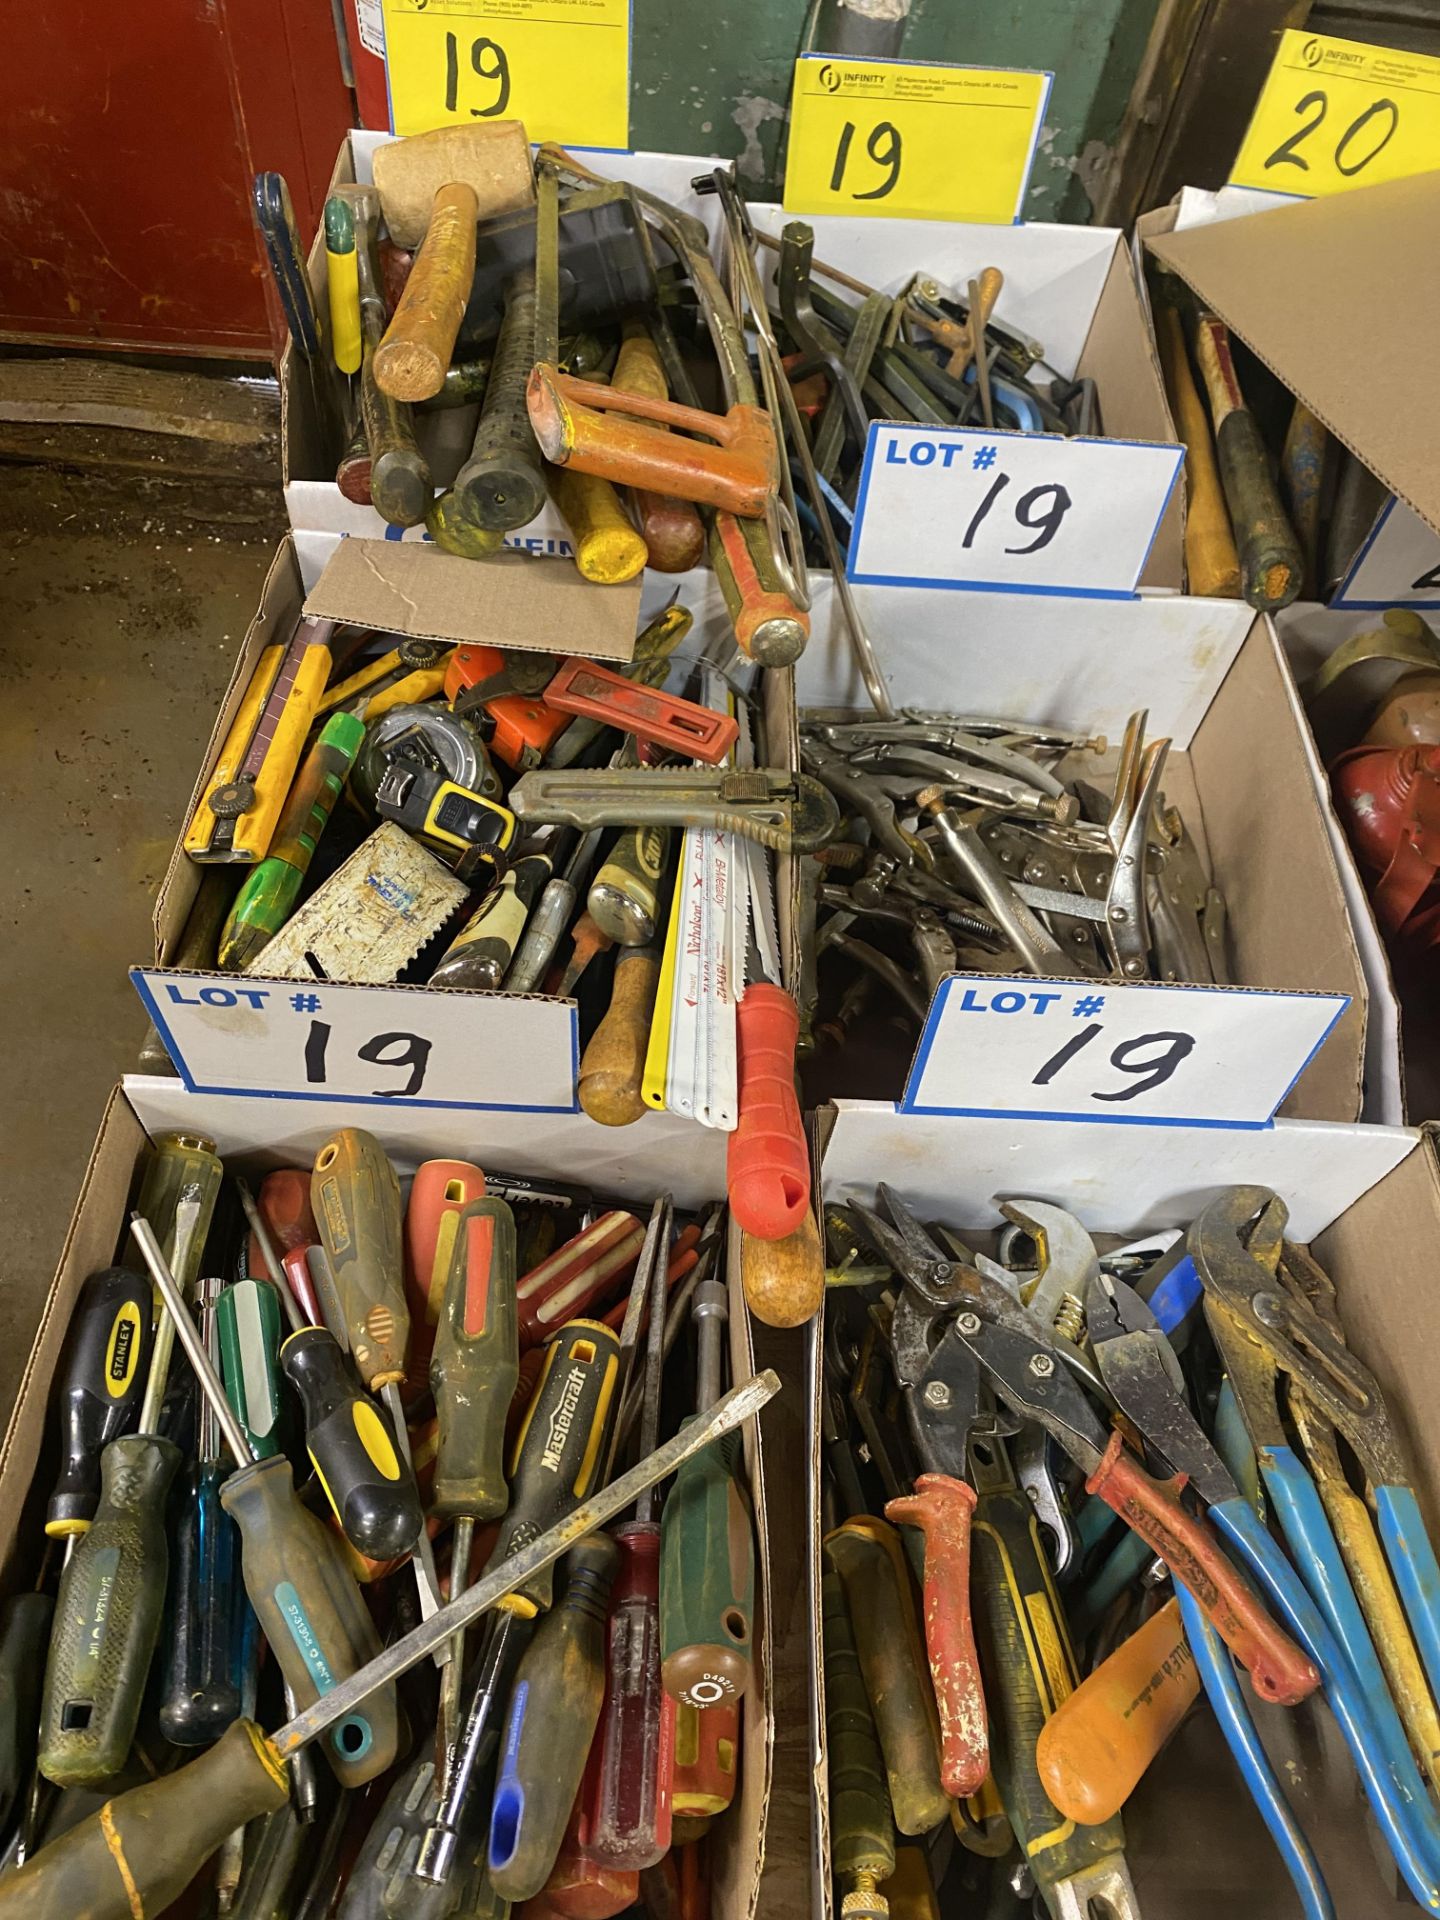 LOT OF (8) BOXES OF TOOLS, CHANNEL LOCKS, DRIVERS, VISE GRIPS, MALLOTS, ALLEN KEYS, MIXED TOOLS,